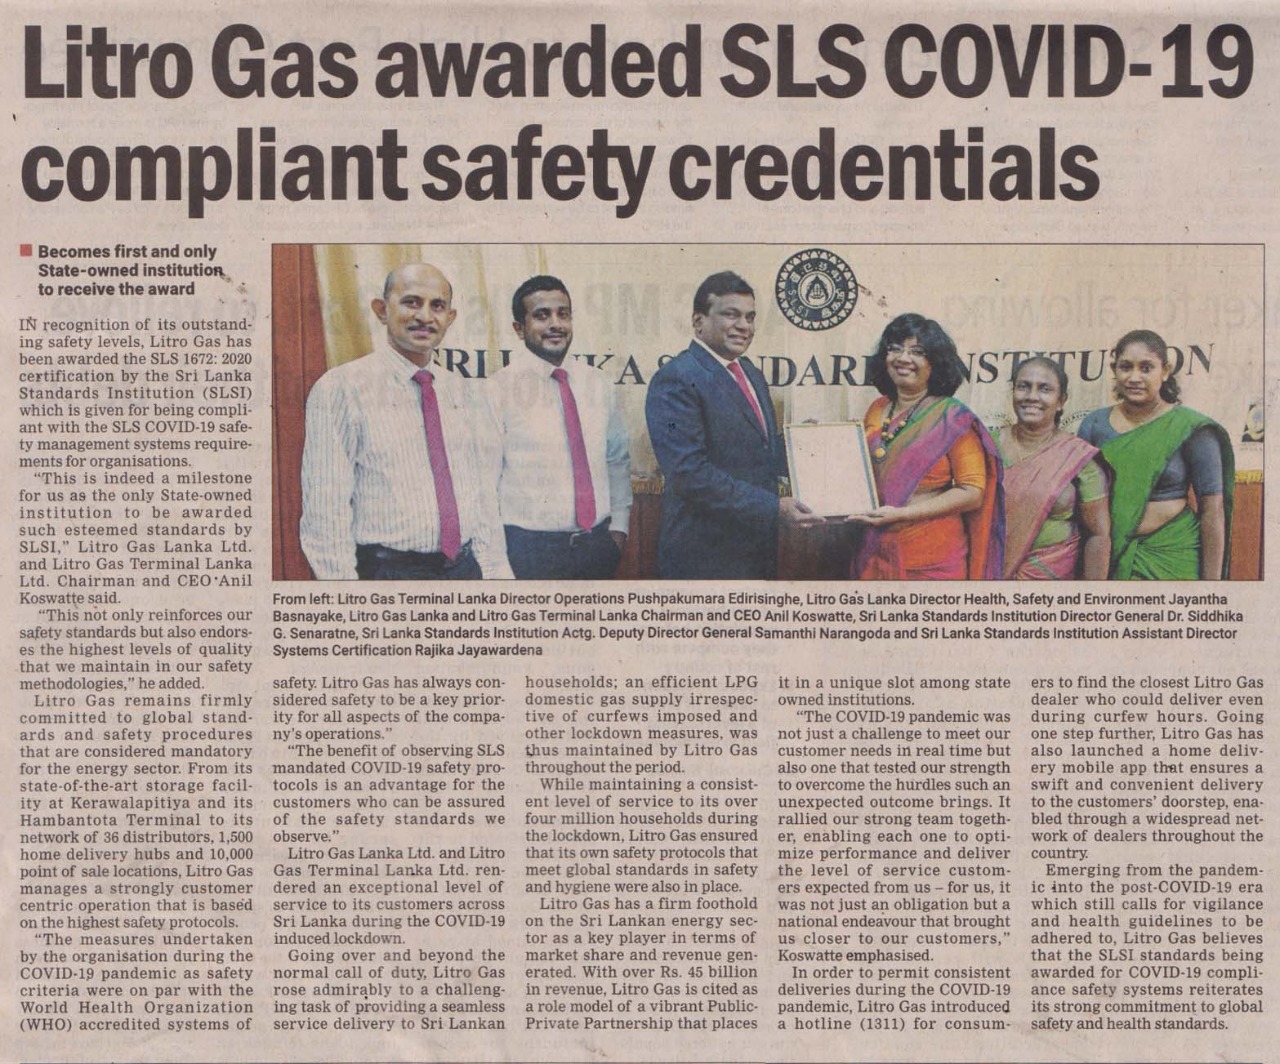 Litro Gas awarded SLS COVID-19 compliant safety credentials